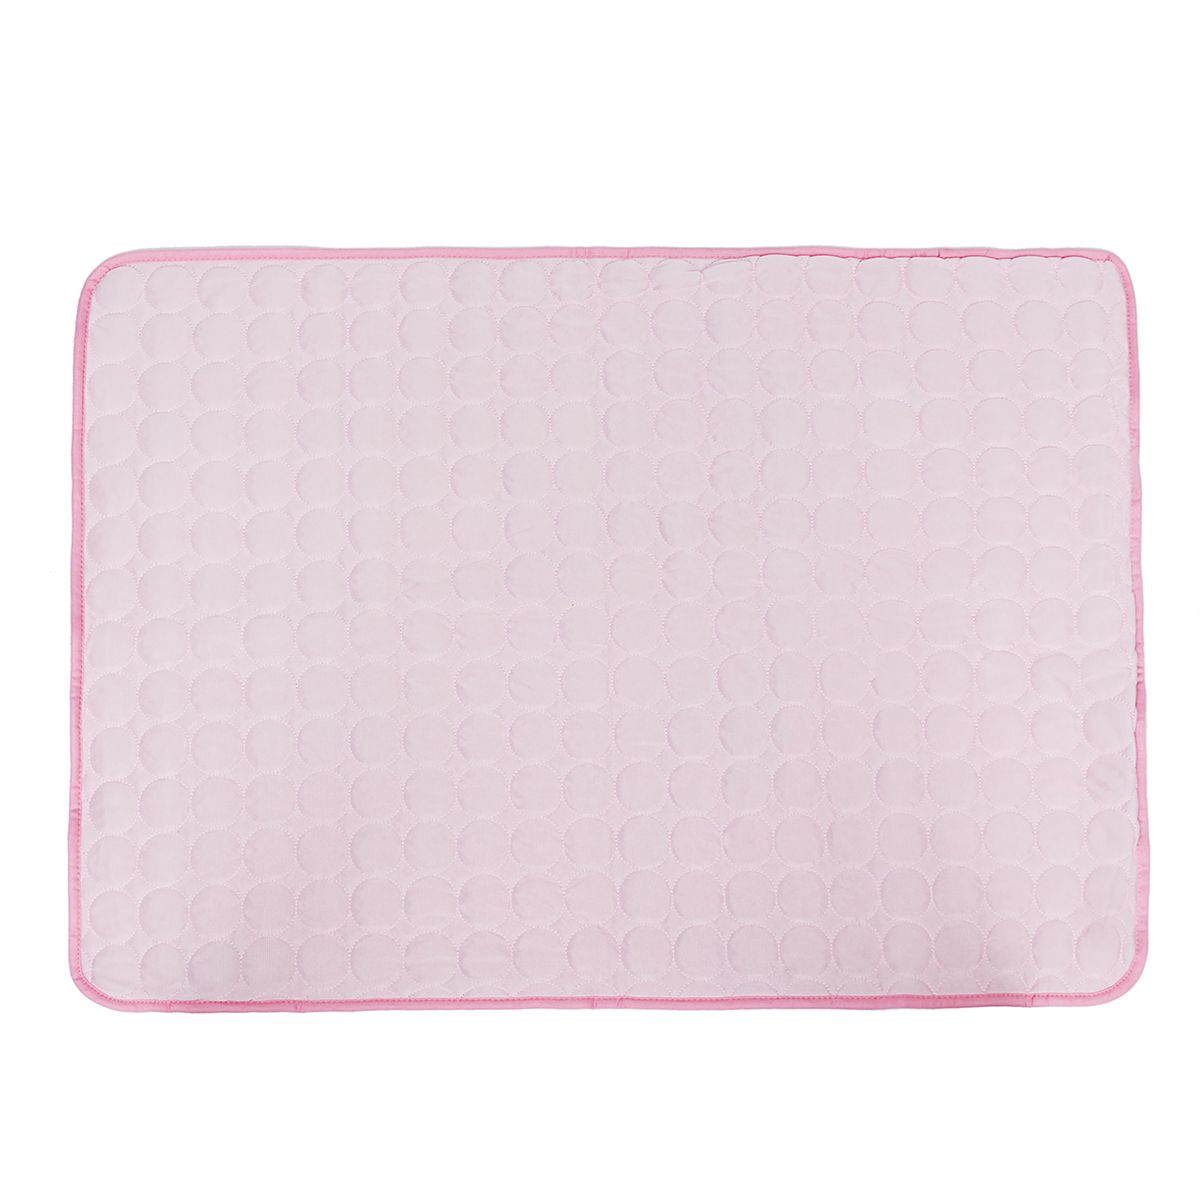 Pink-Pet-Summer-Cooling-Mat-Cold-Gel-Pad-Comfortable-Cushion-For-Dog-Cat-Puppy-Decorations-1543407